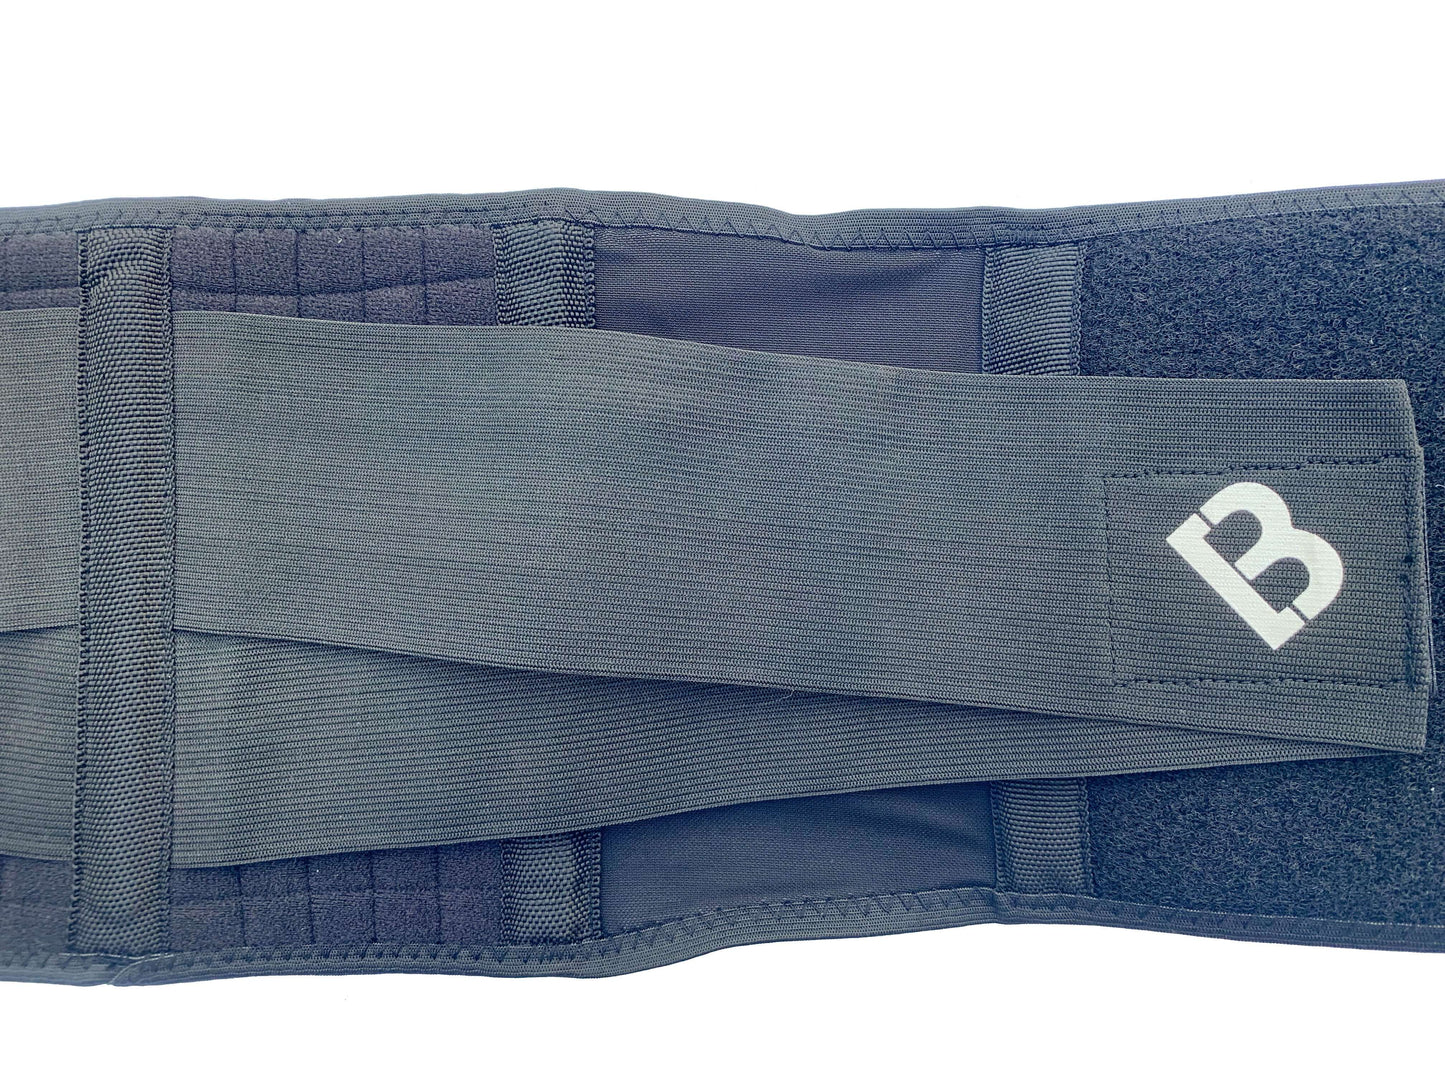 A close up of the Bio Magnetic Back Supports double elastic closure that features the Bio Magnetic Logo and shows the high quality stays that are included in the Bio magnetic Back Support. 